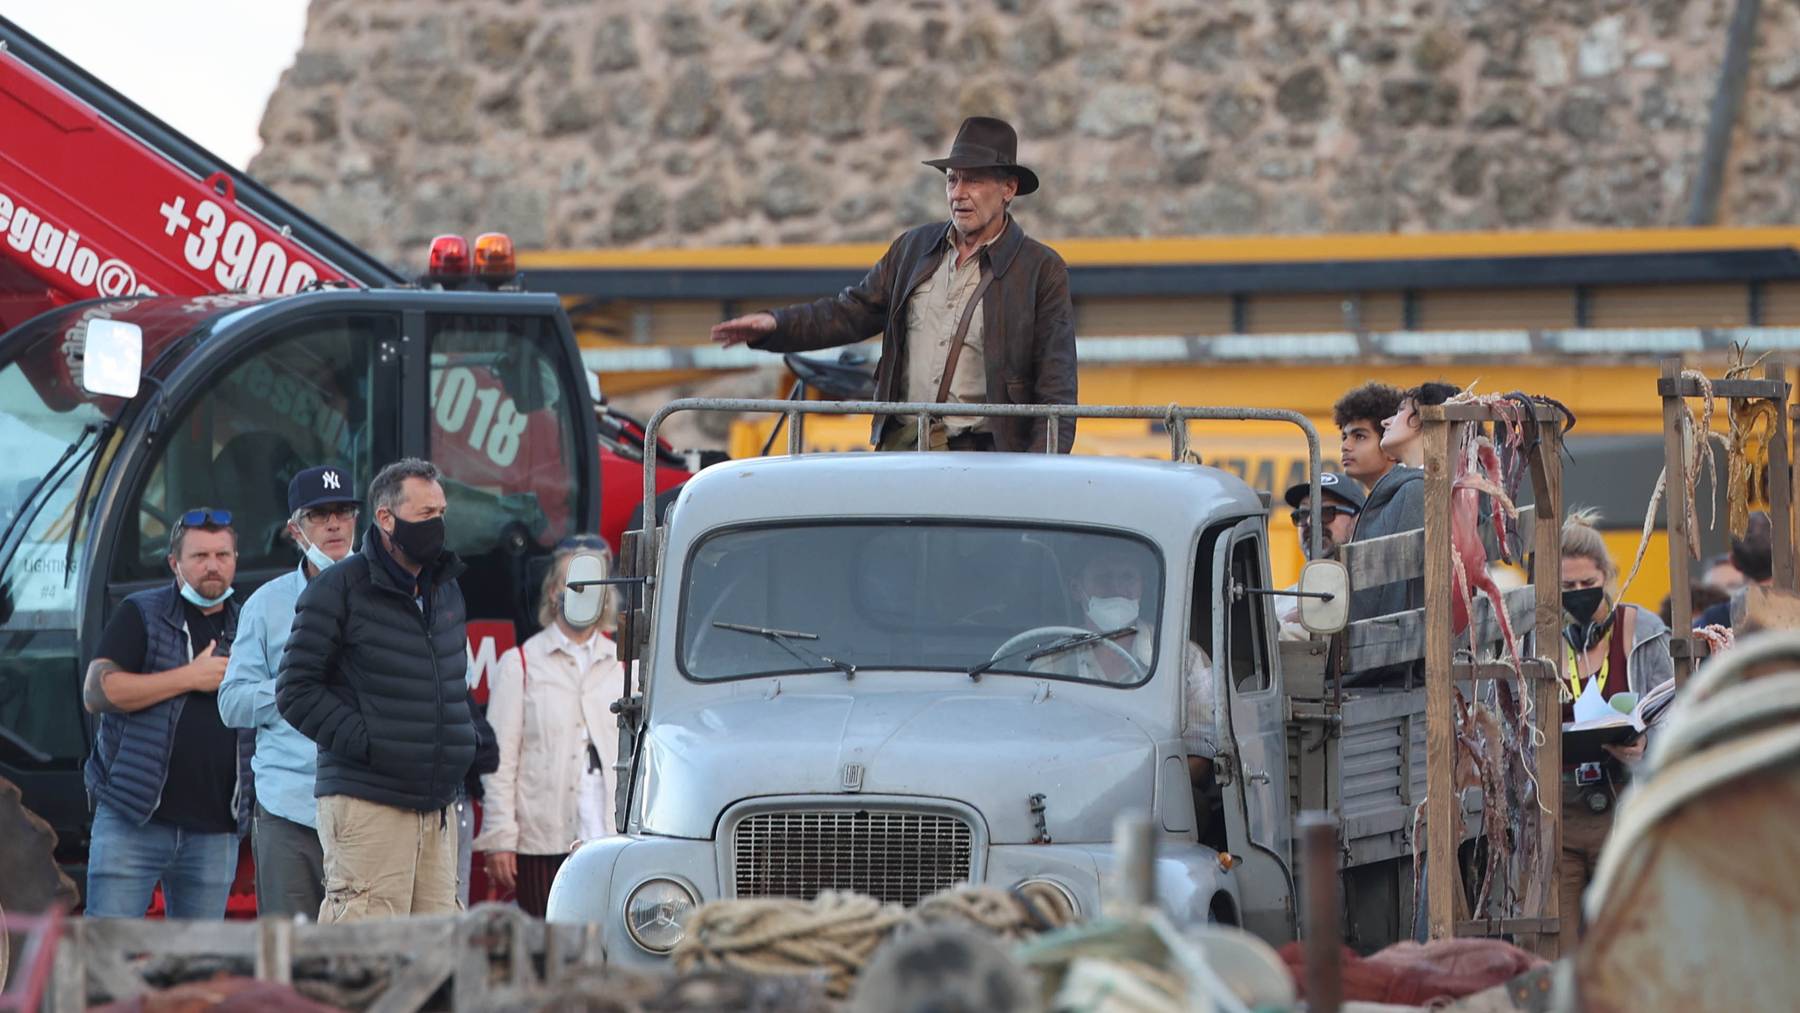 Harrison Ford is seen on the set of «Indiana Jones 5» in Sicily on October 18, 2021 in Castellammare del Golfo, Italy.